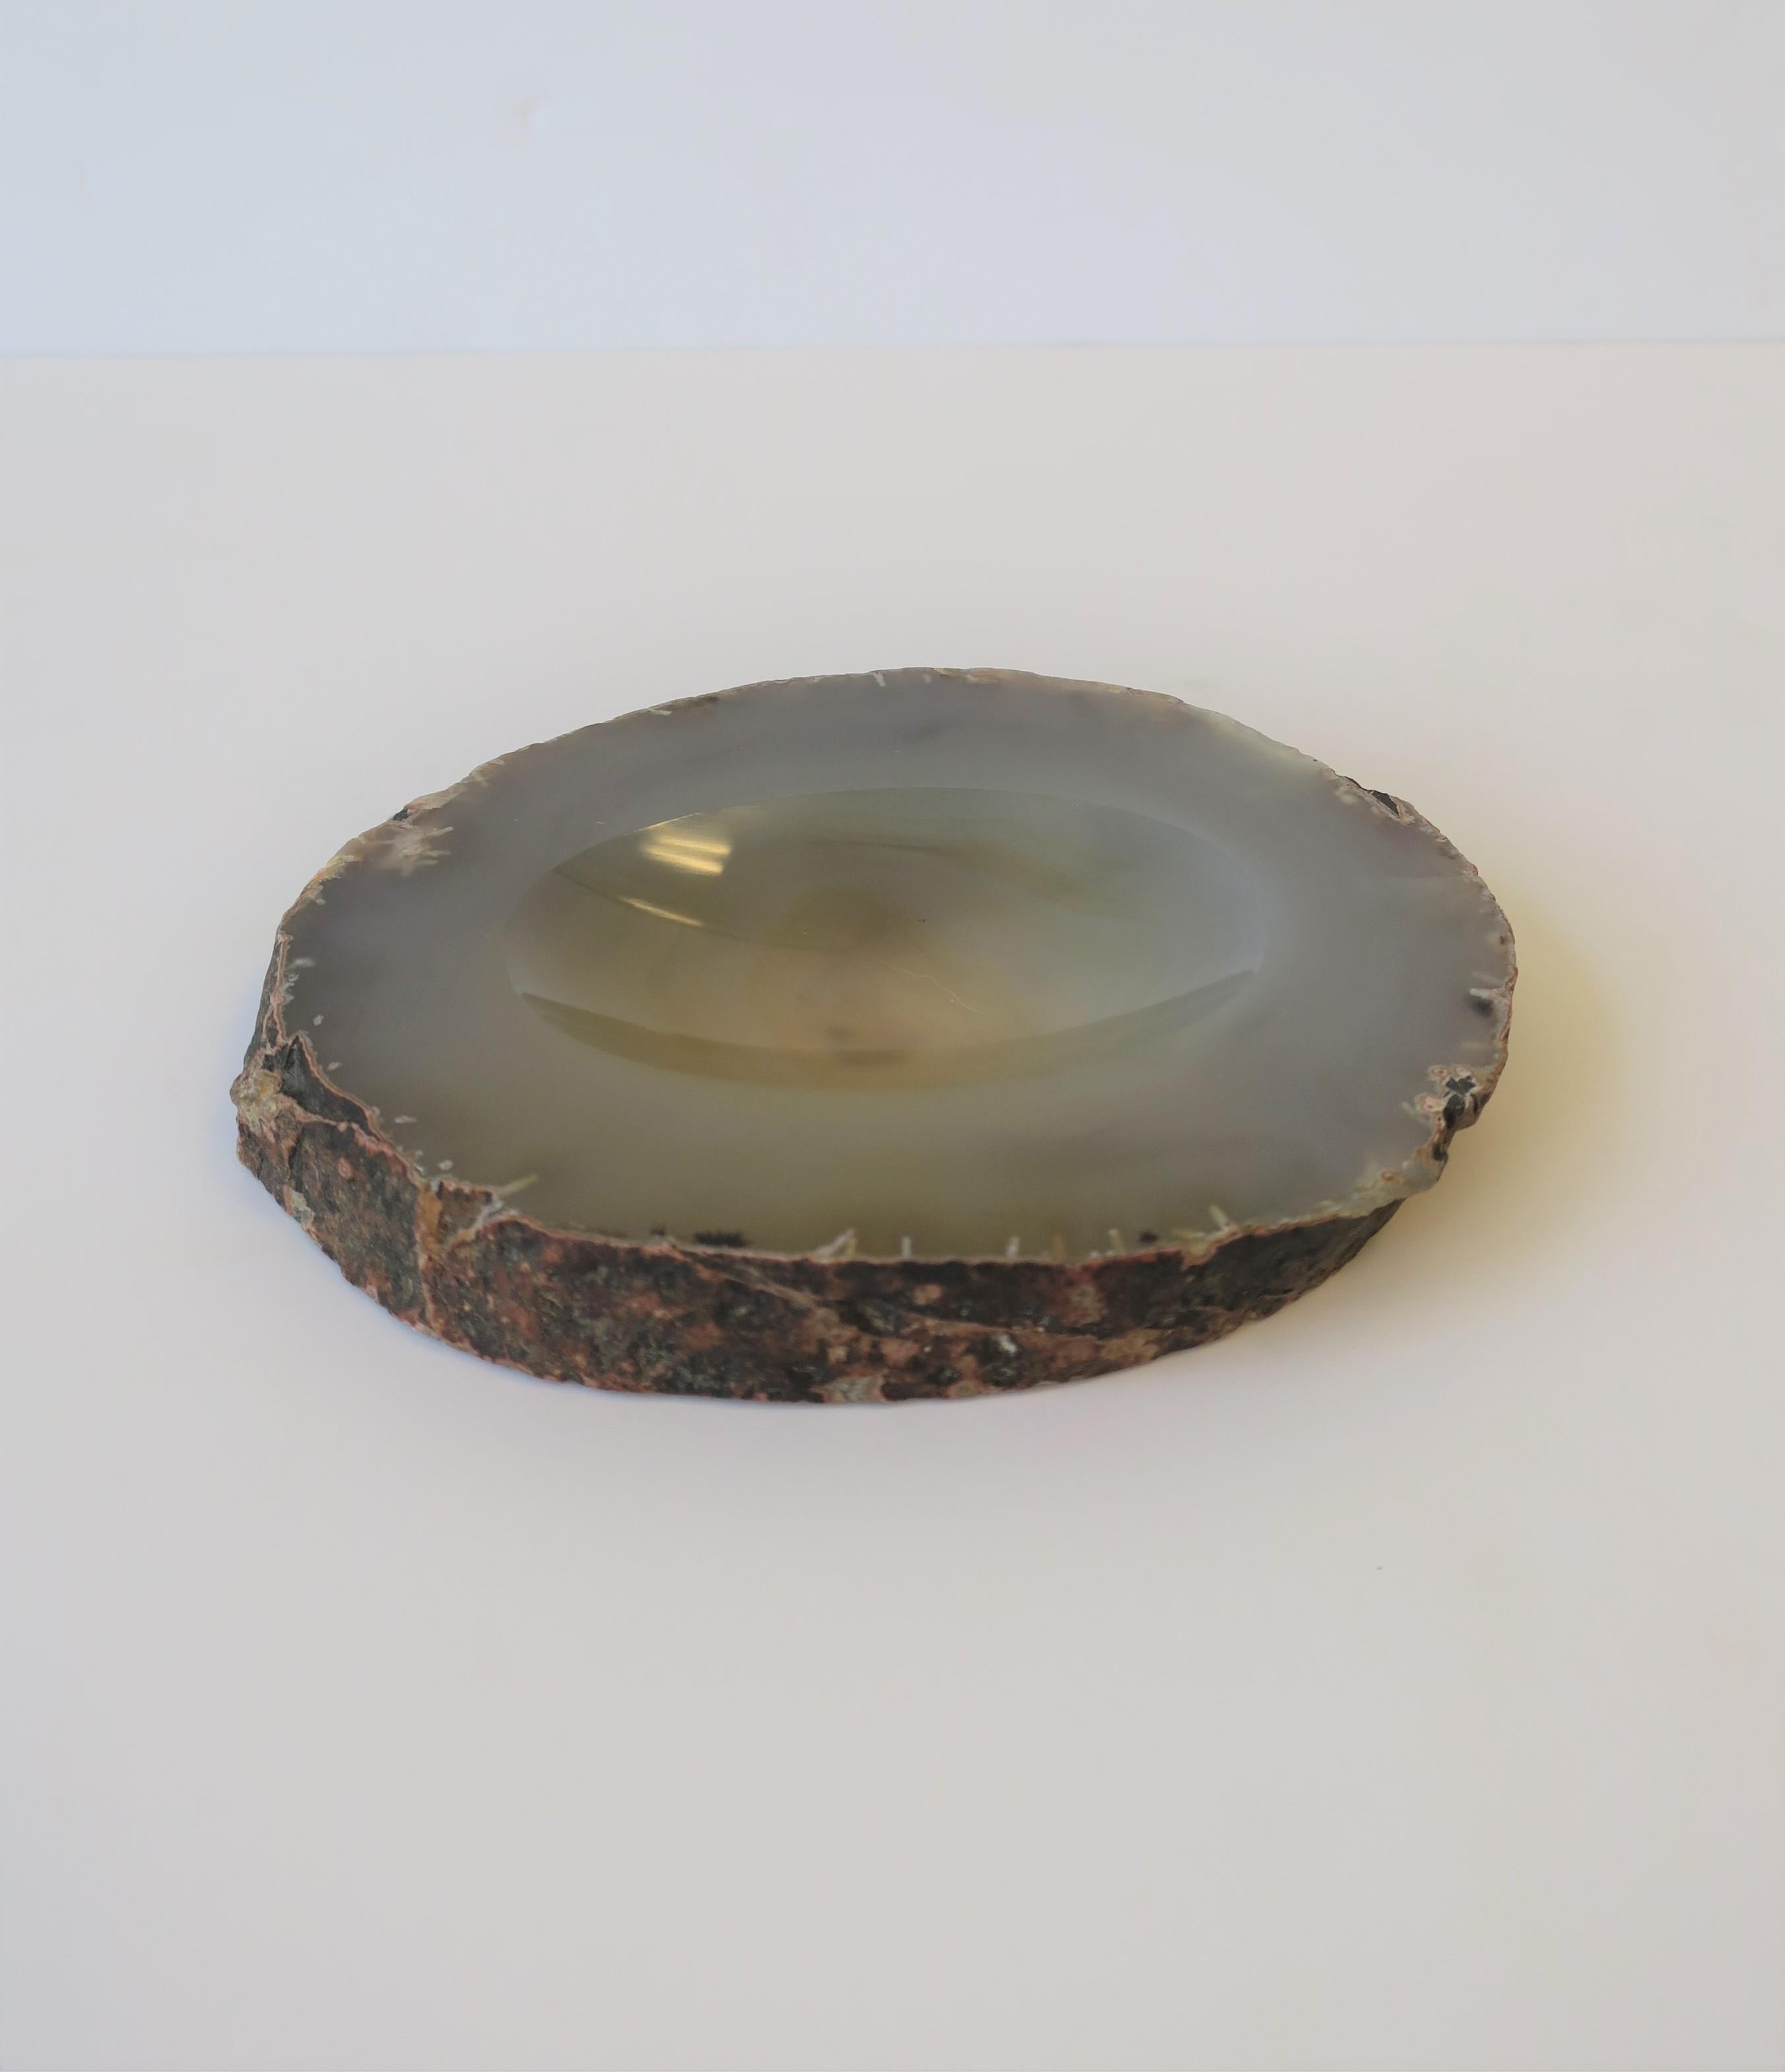 Grey Agate Vessel Bowl or Decorative Object 1